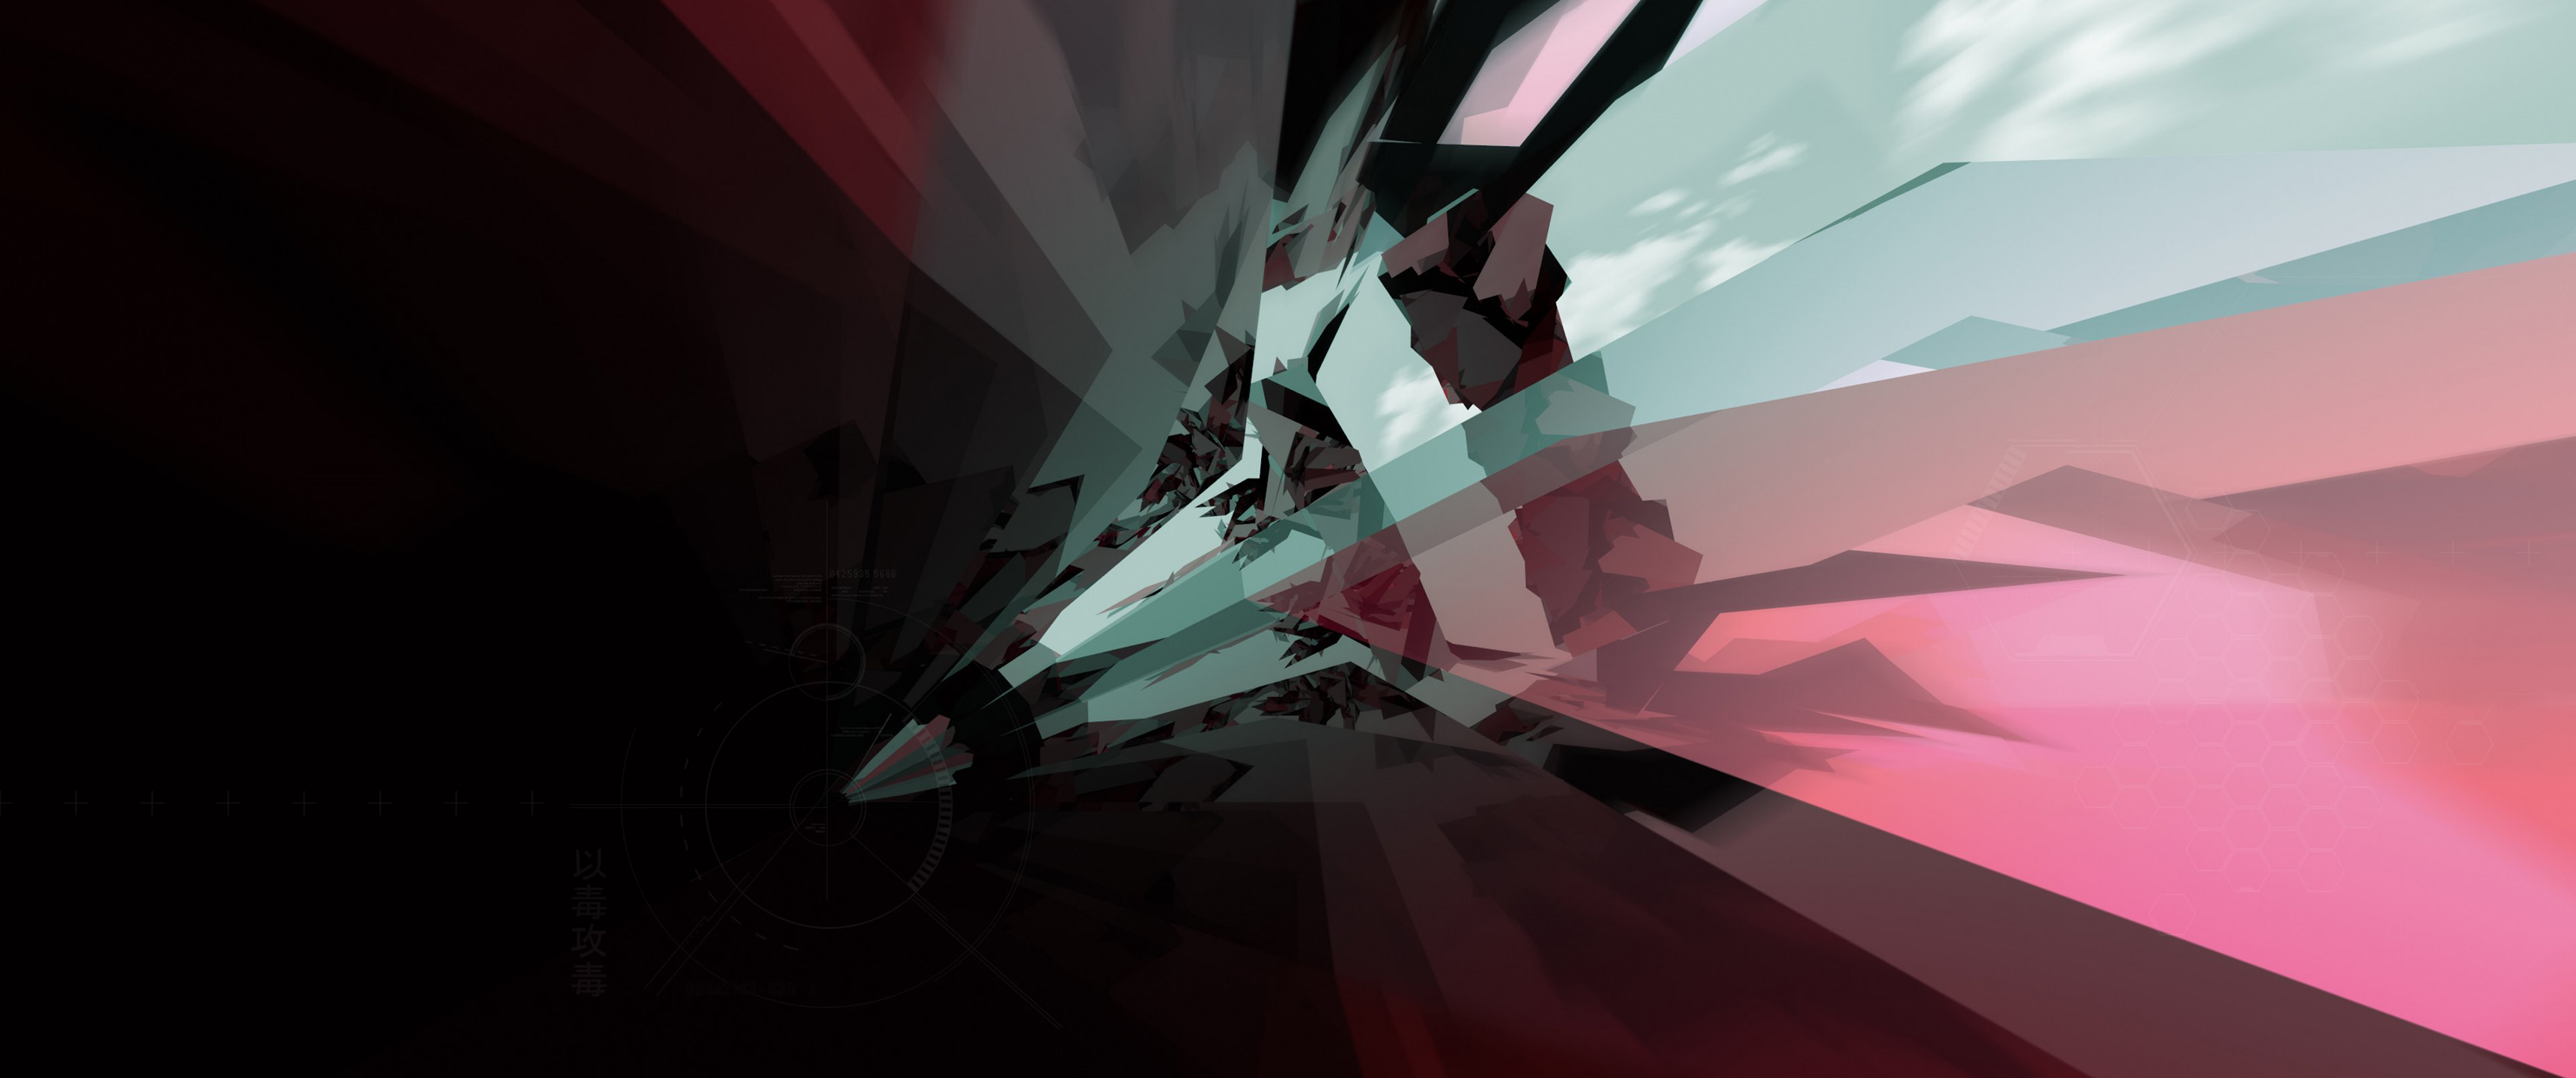 General 3440x1440 digital art spaceship space low poly abstract